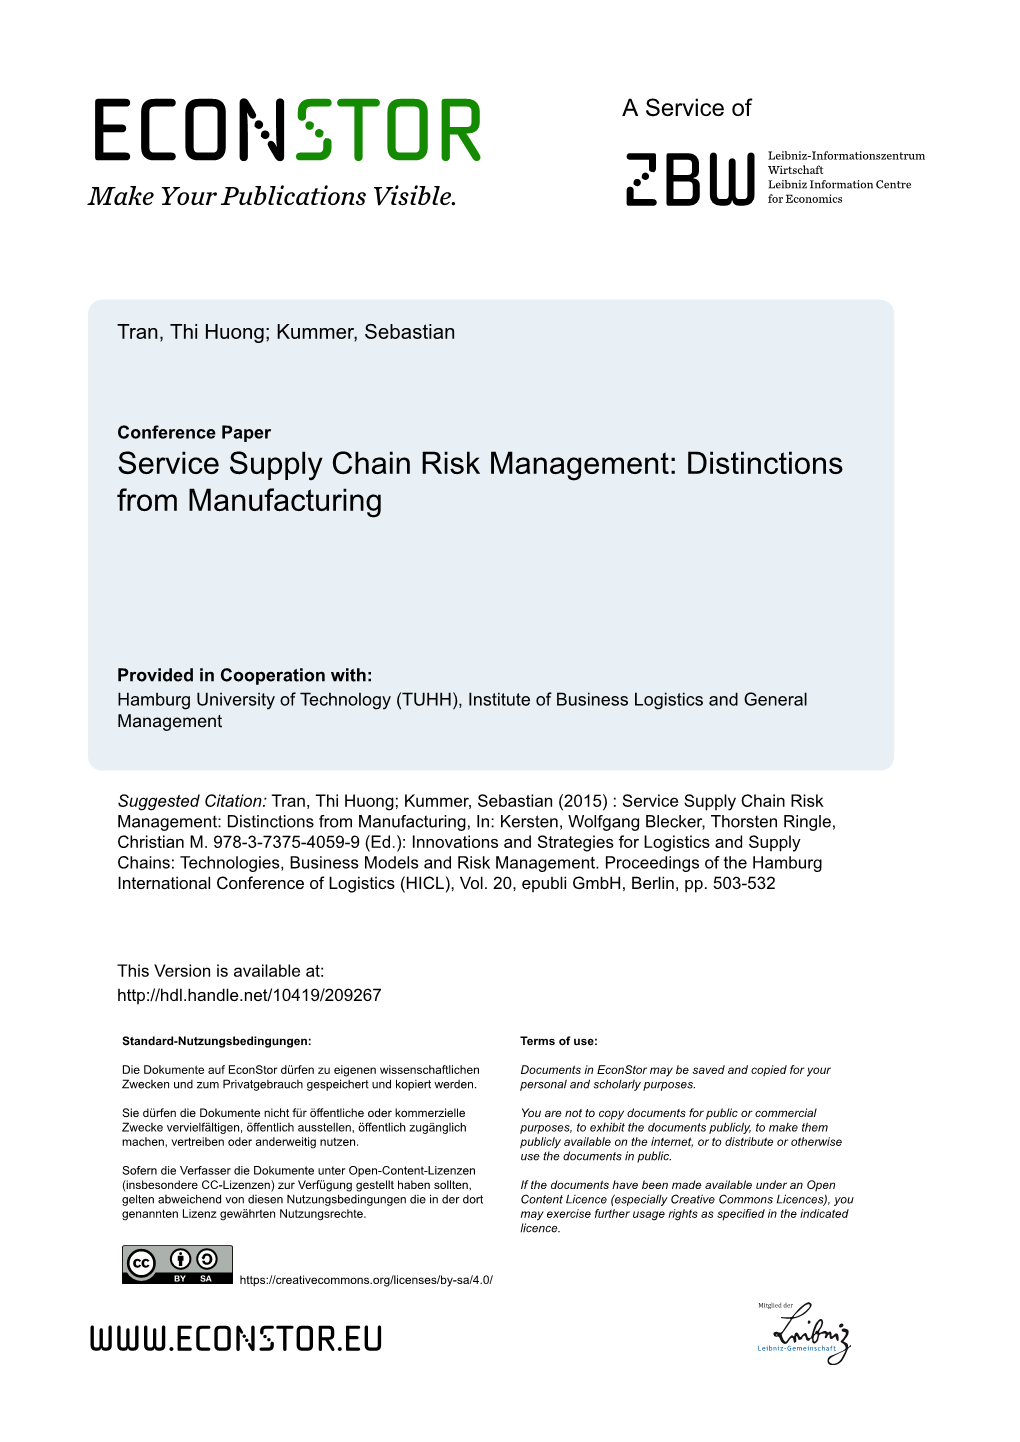 Service Supply Chain Risk Management: Distinctions from Manufacturing